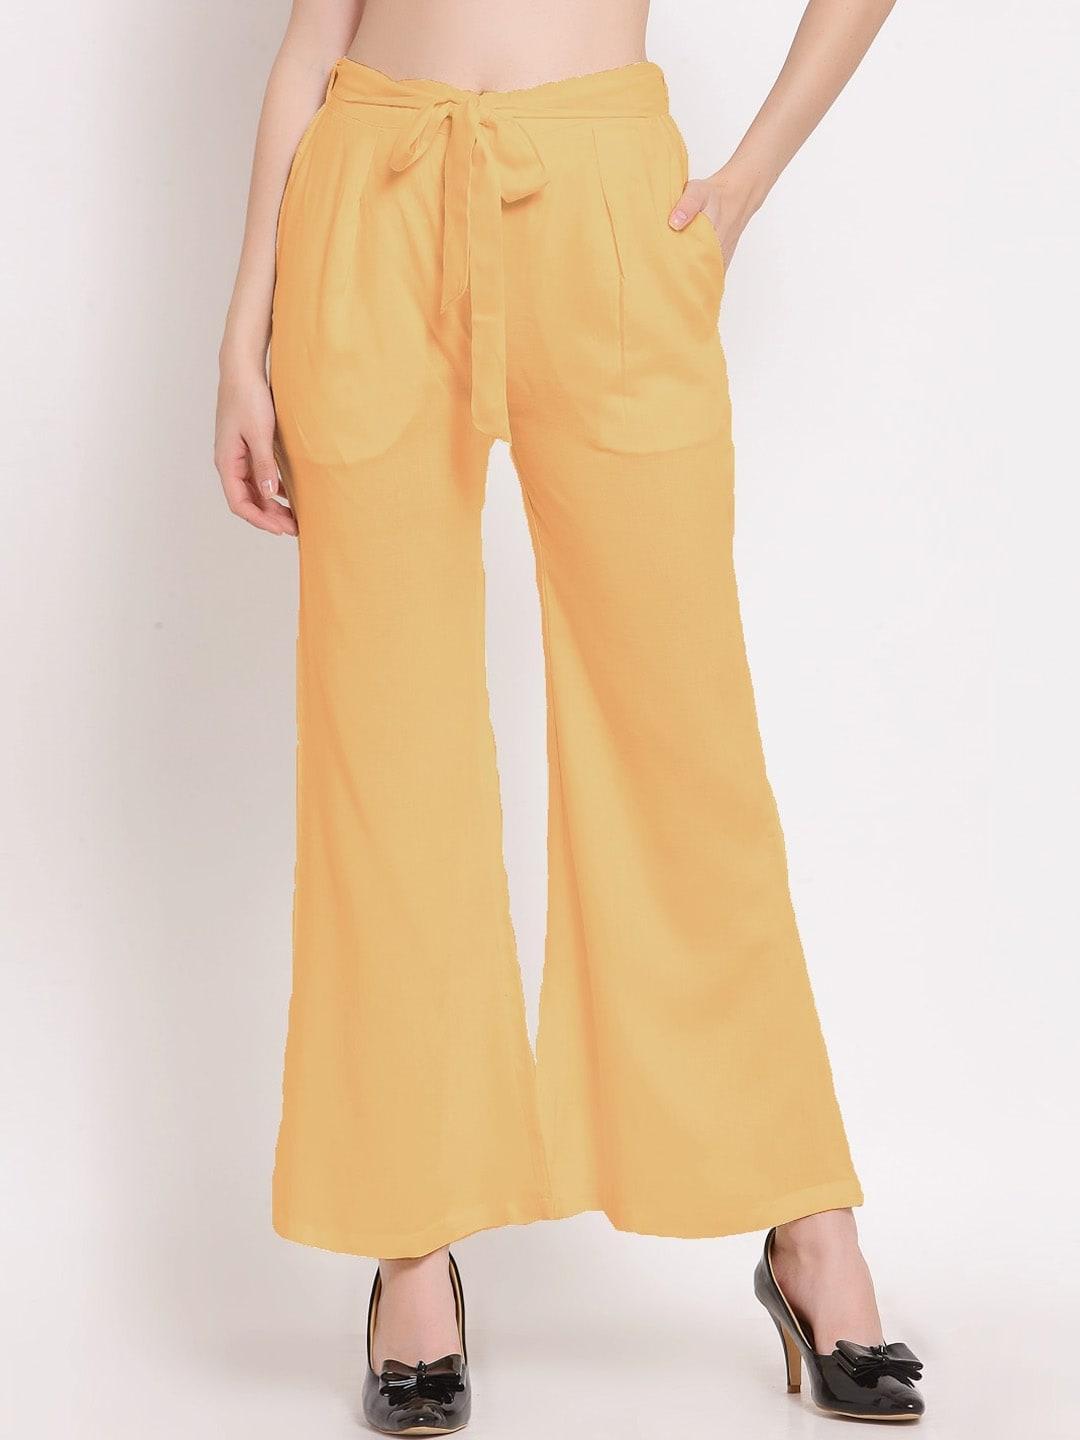 patrorna women smart tapered fit pleated culotte trousers